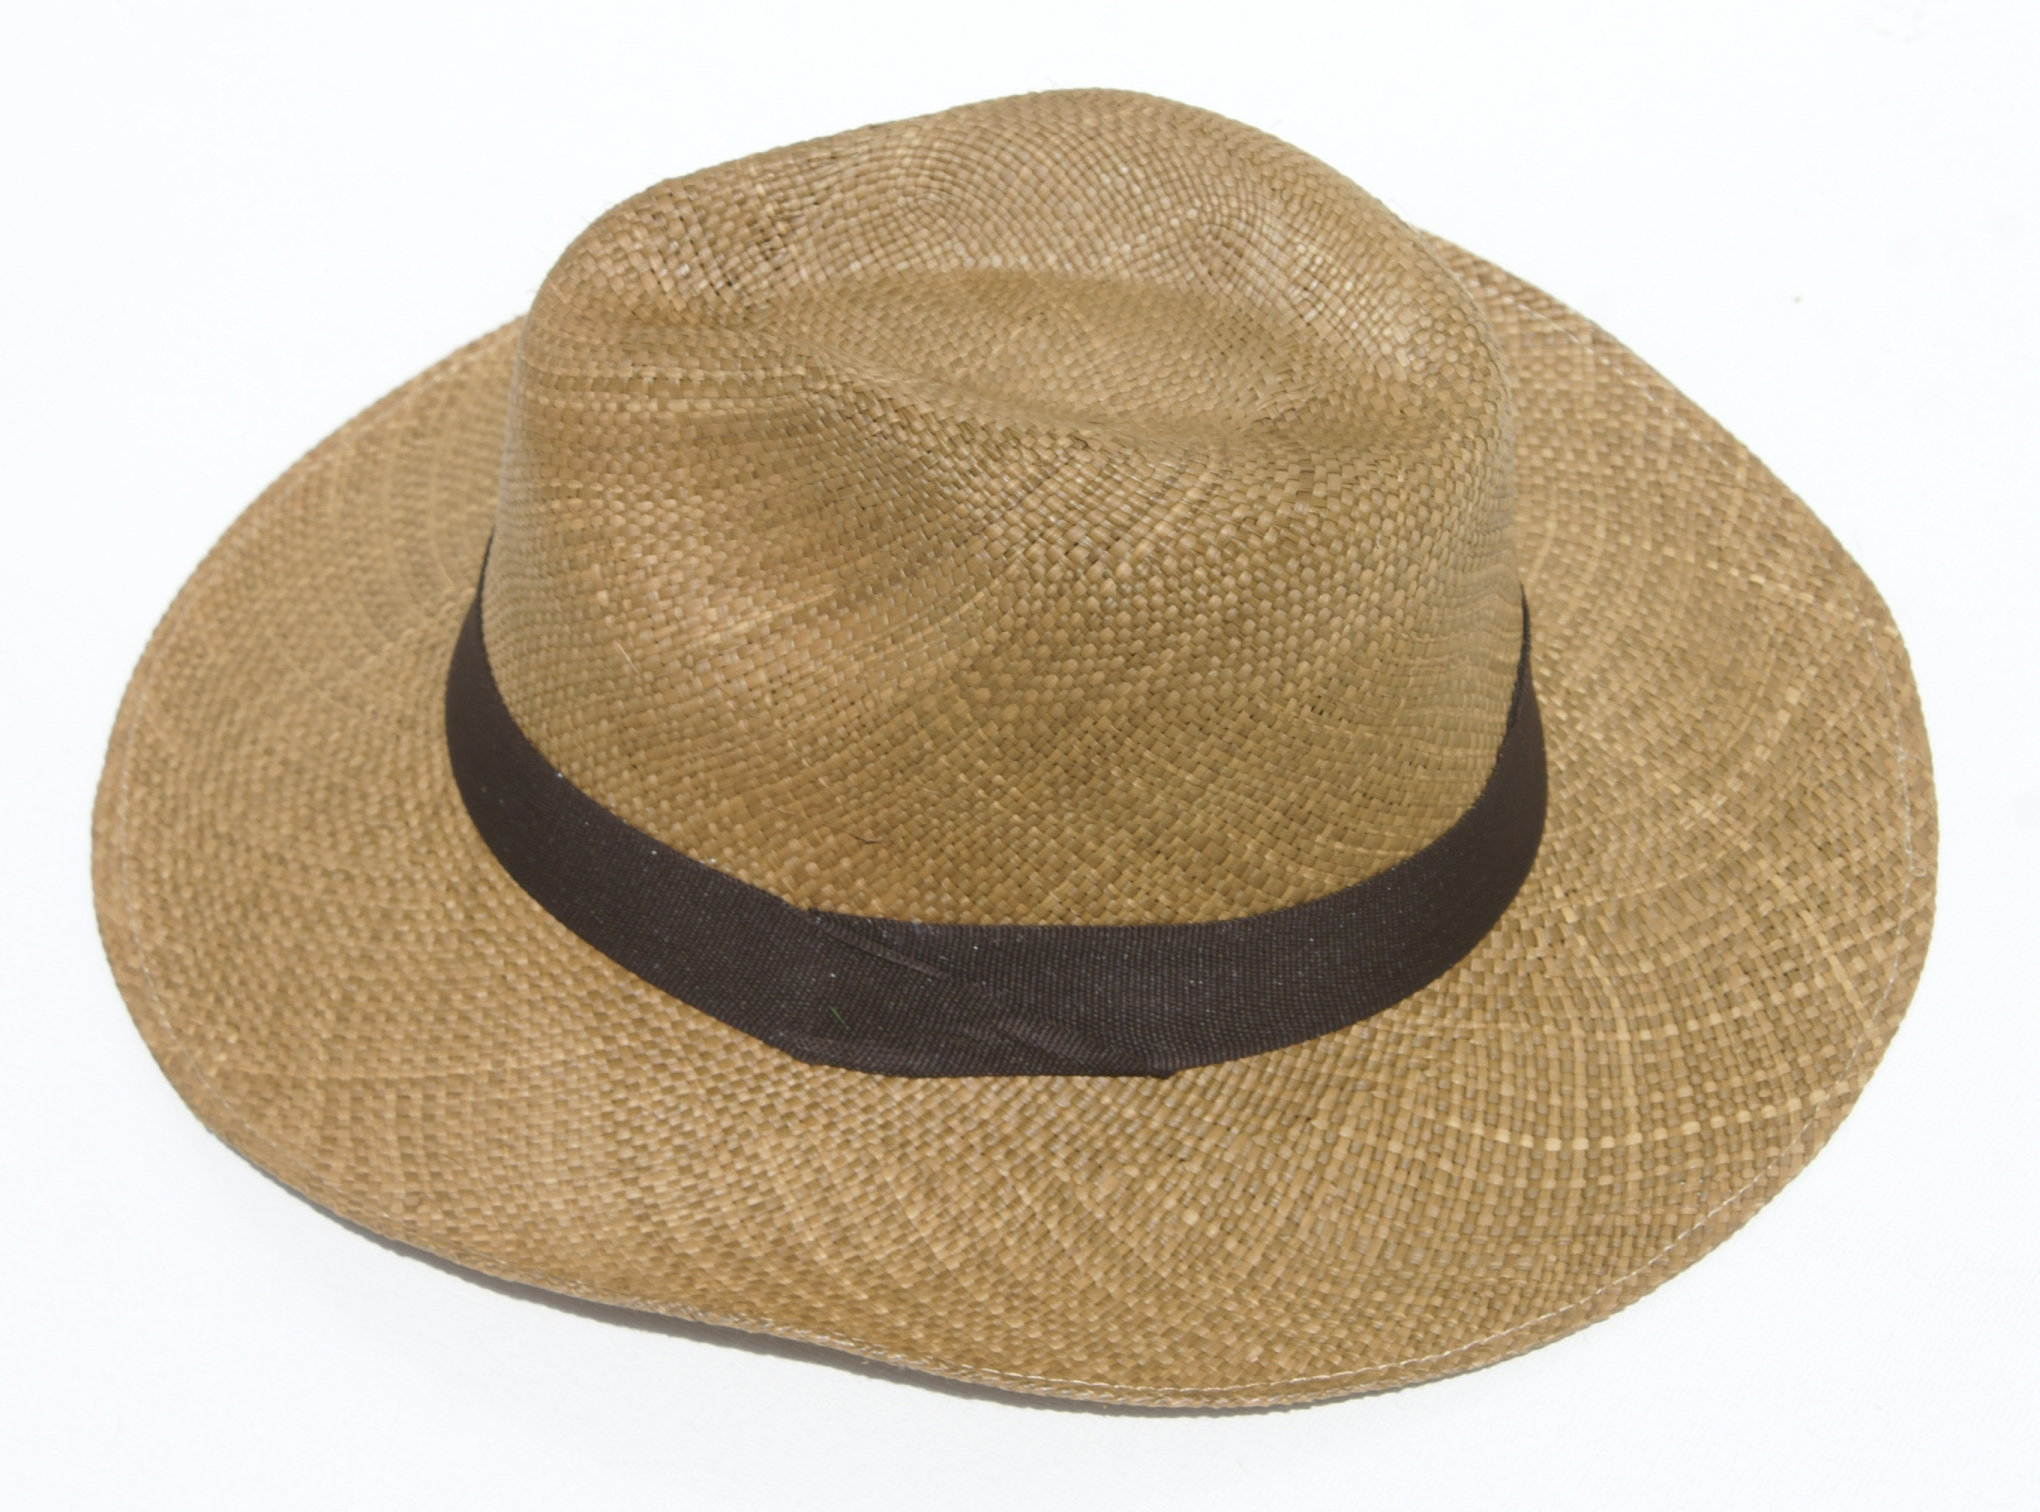 Hats for Men Toquilla Straw of Brown Color - $24.95 USD - GlobeBids